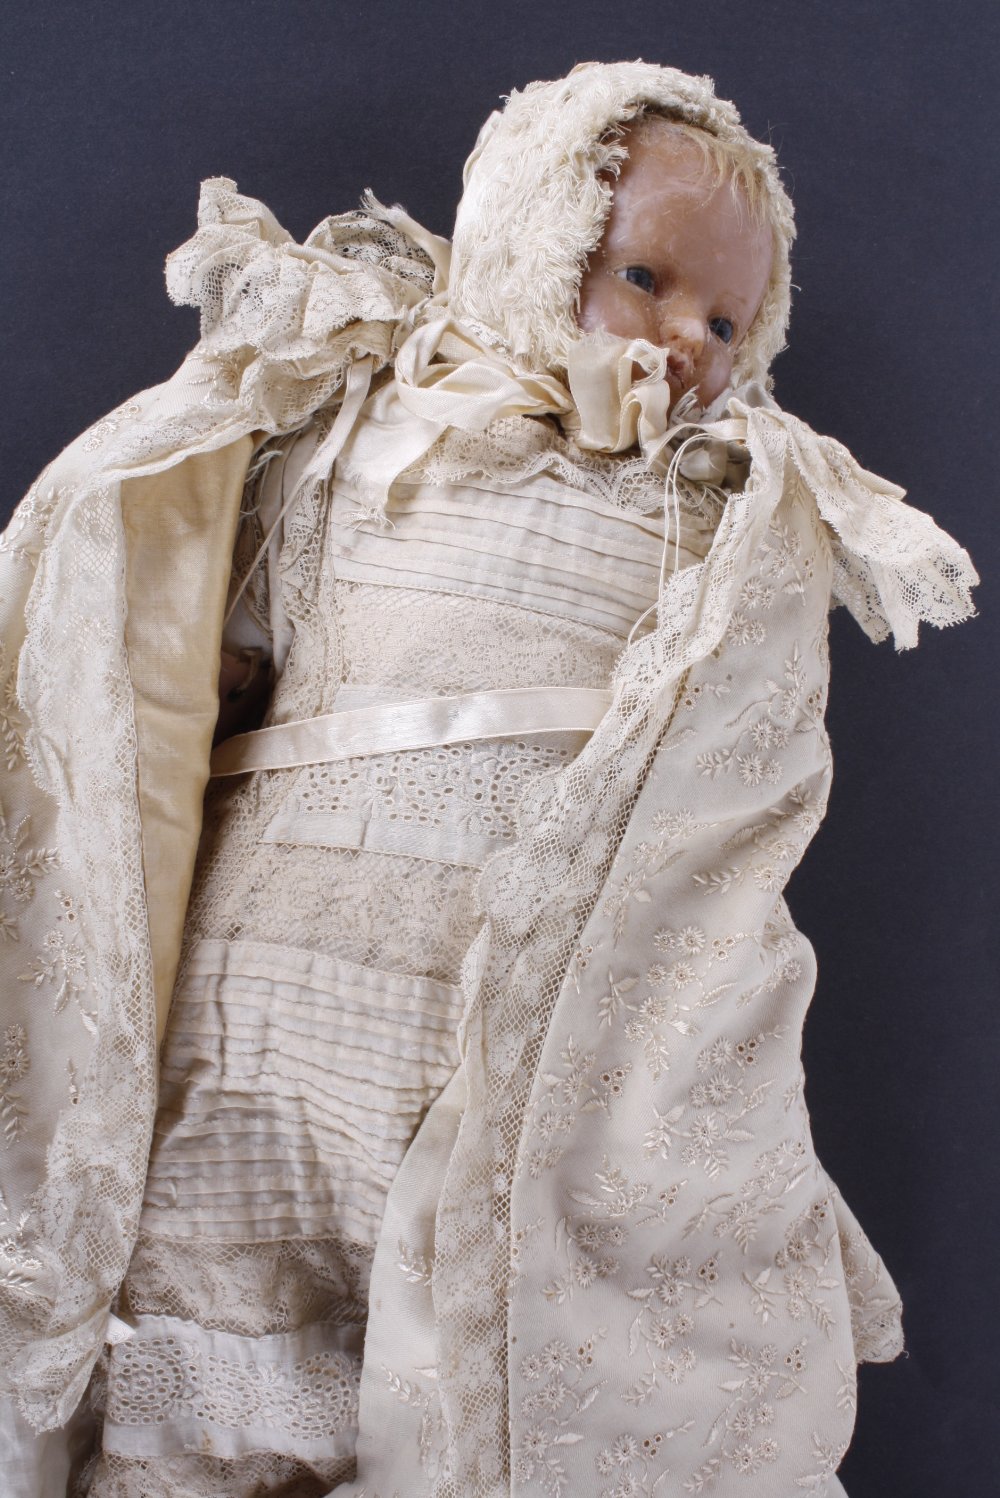 A 19th century baby doll. Wax head attached to a cloth body, blond human hair, stationary blue glass